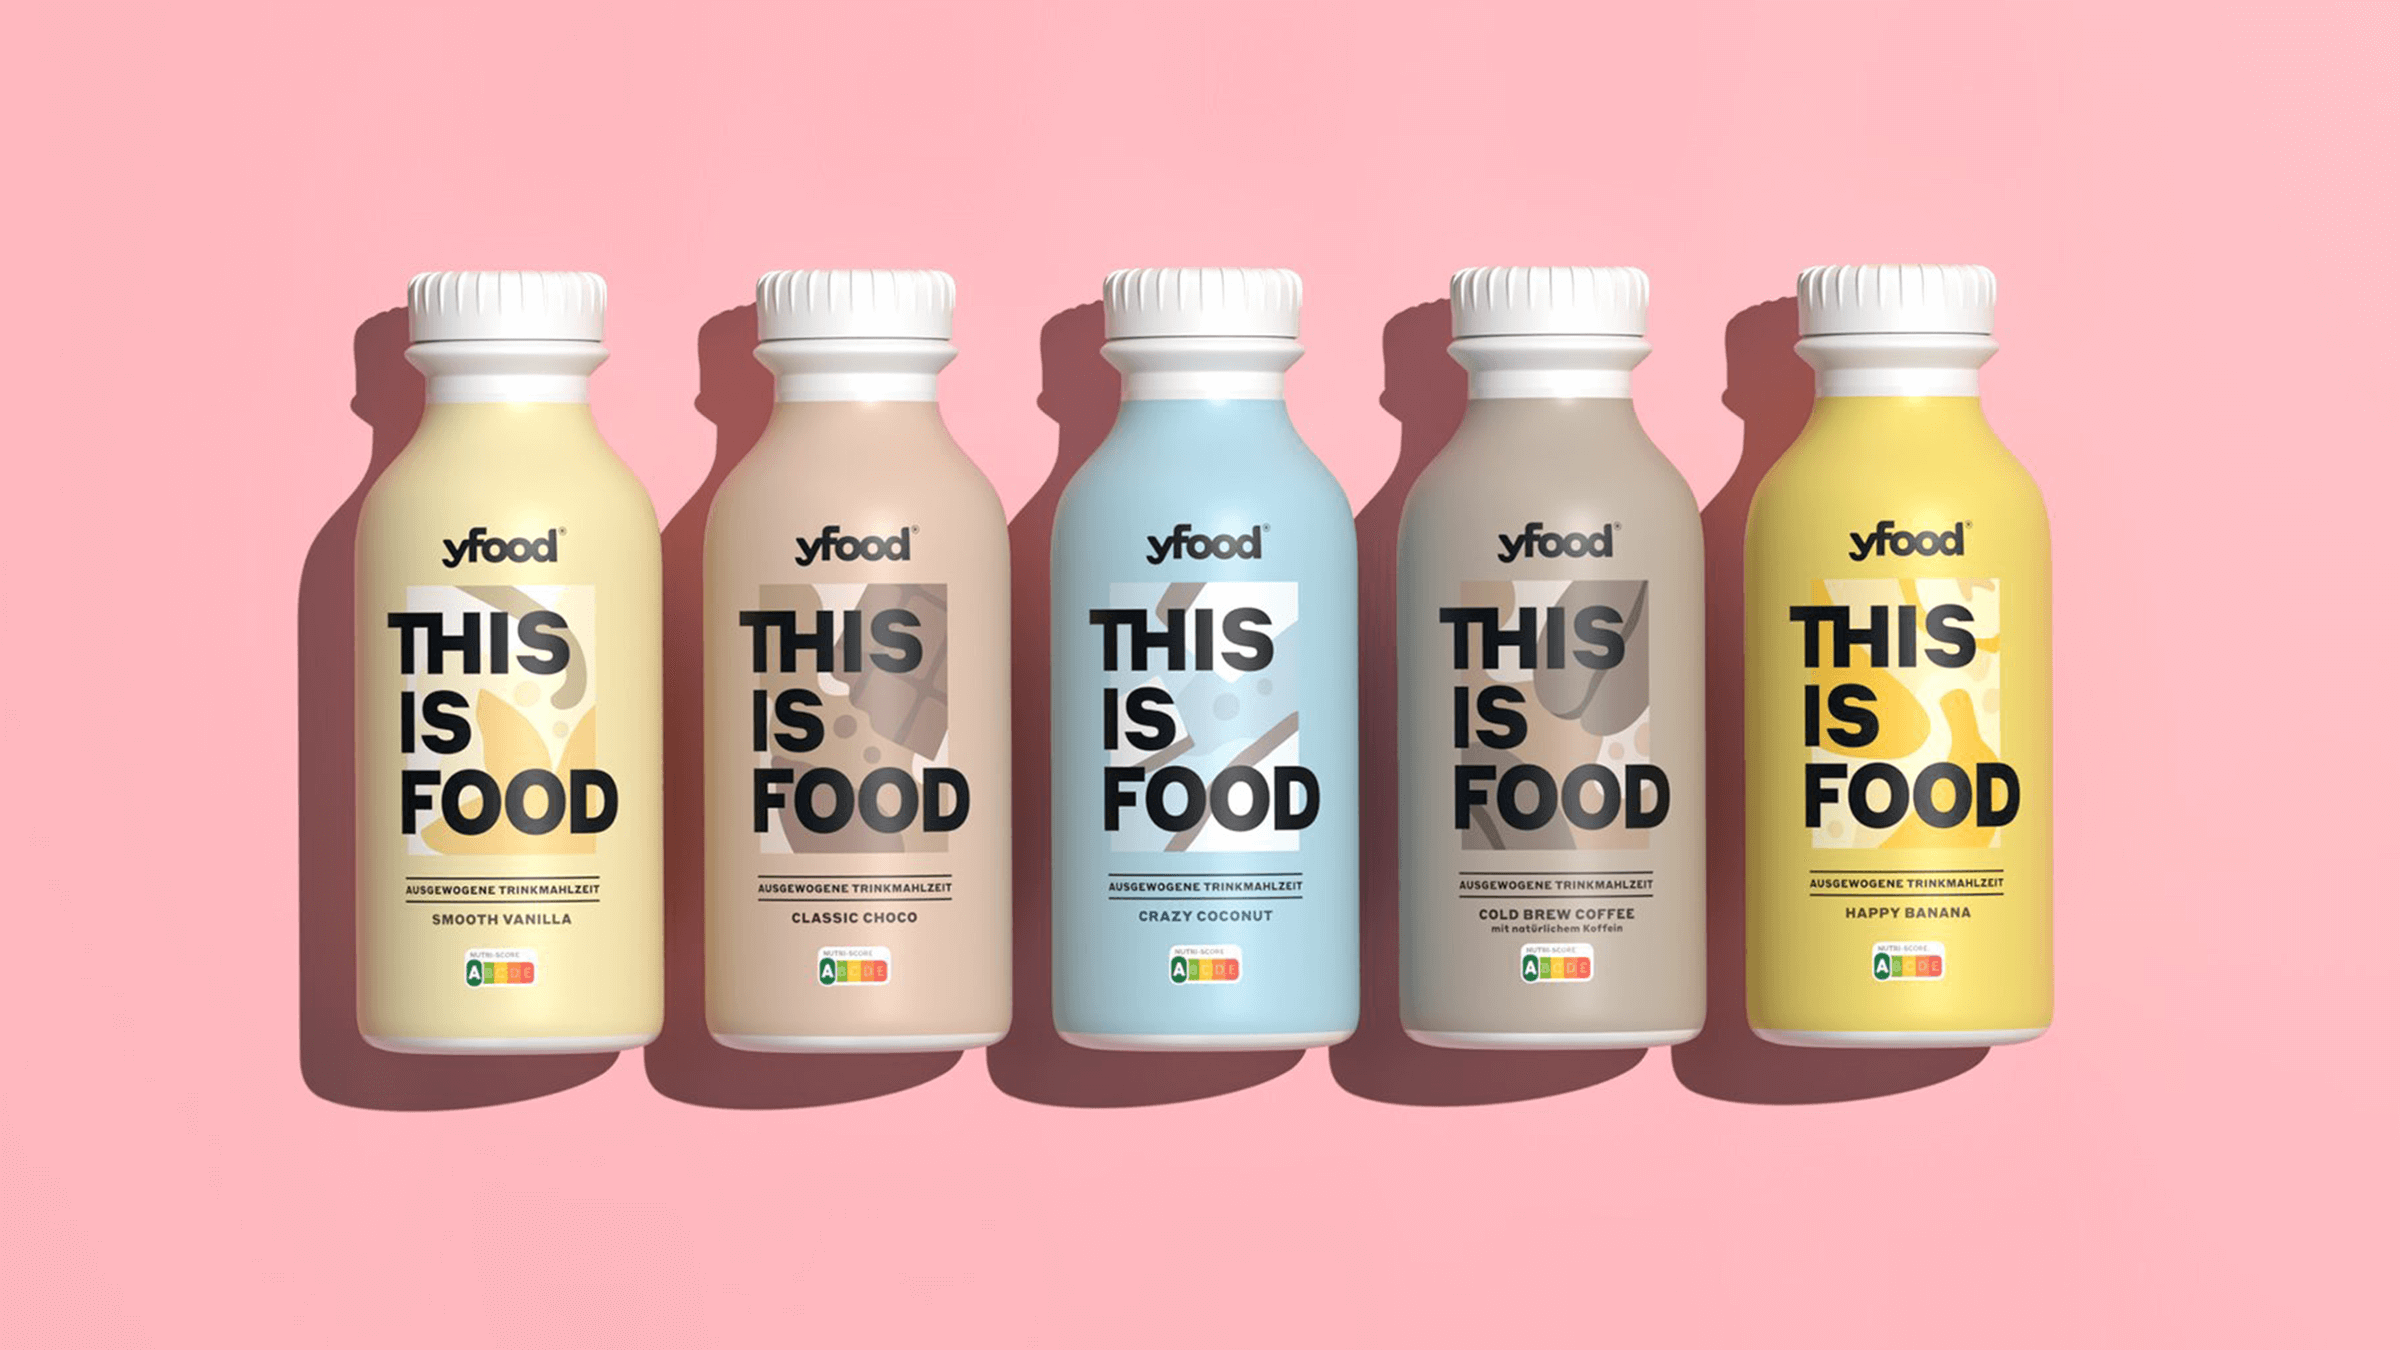 yFood and MUTABOR: Rebranding from logo to the shape of the bottle